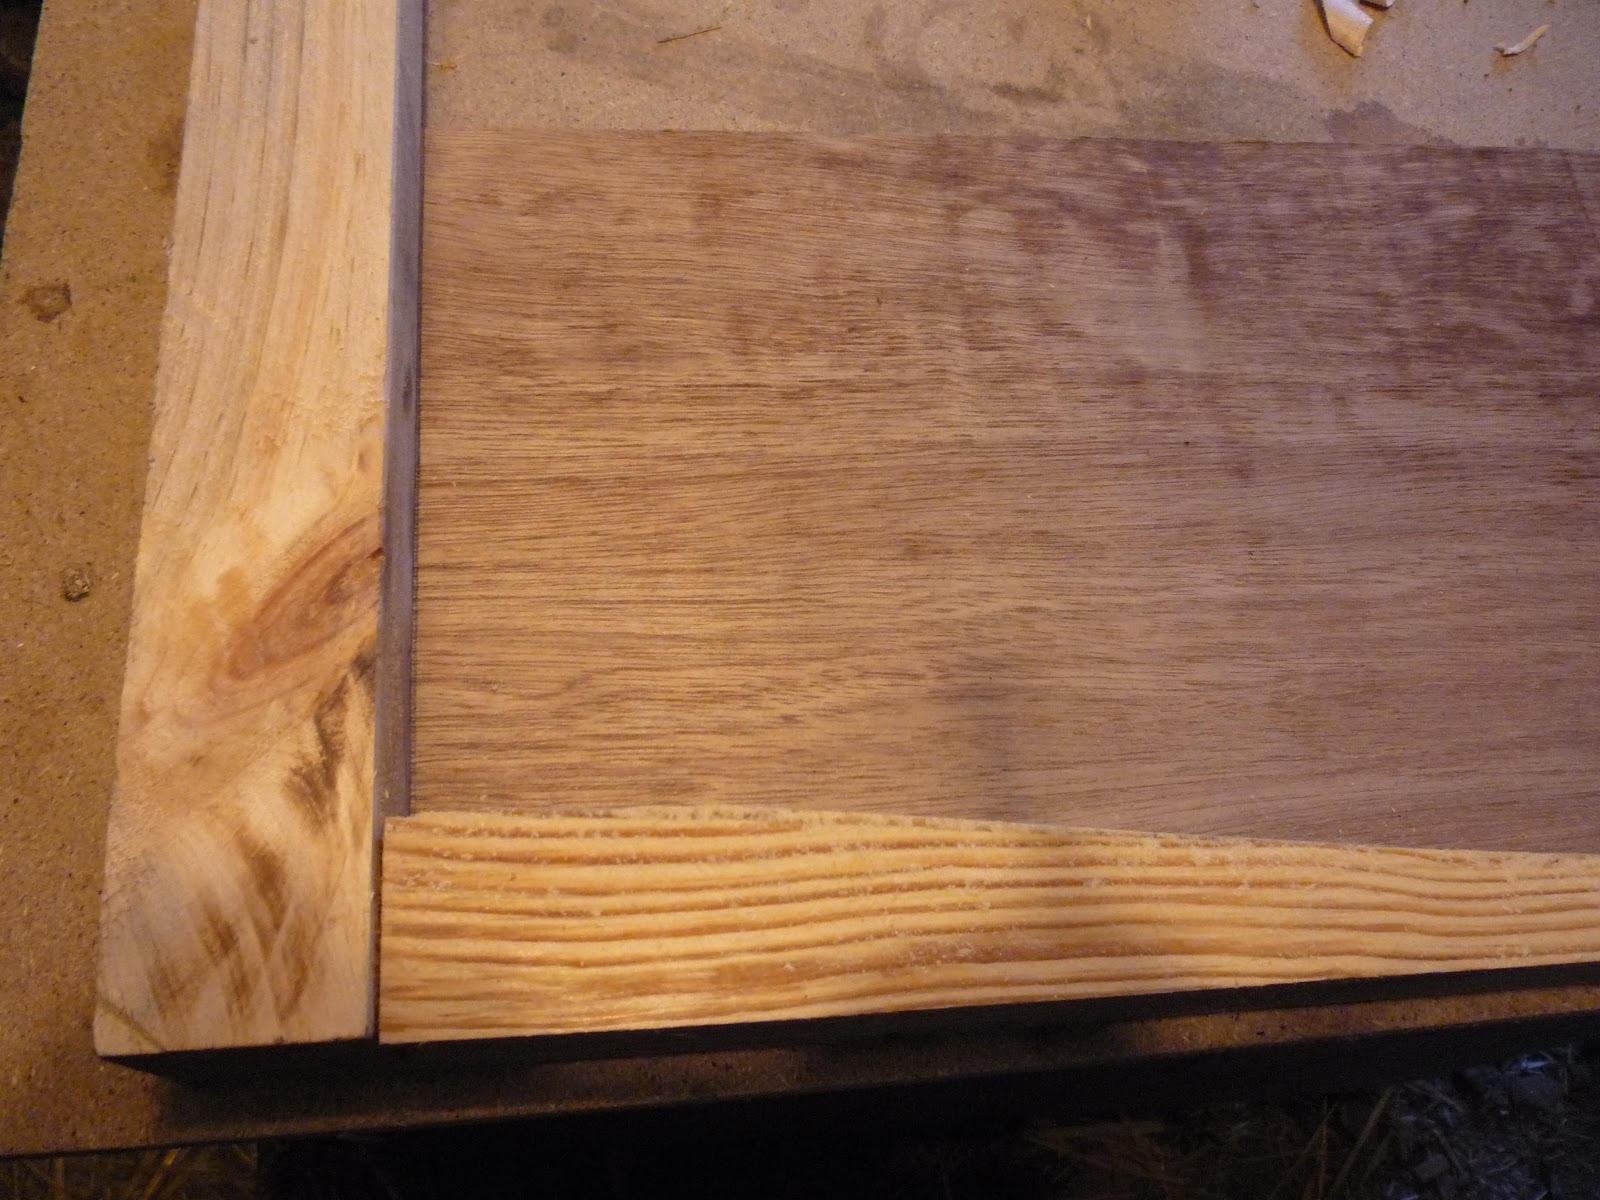 Using a sheet of plywood approx 13mm (½"), recuperated from a low 